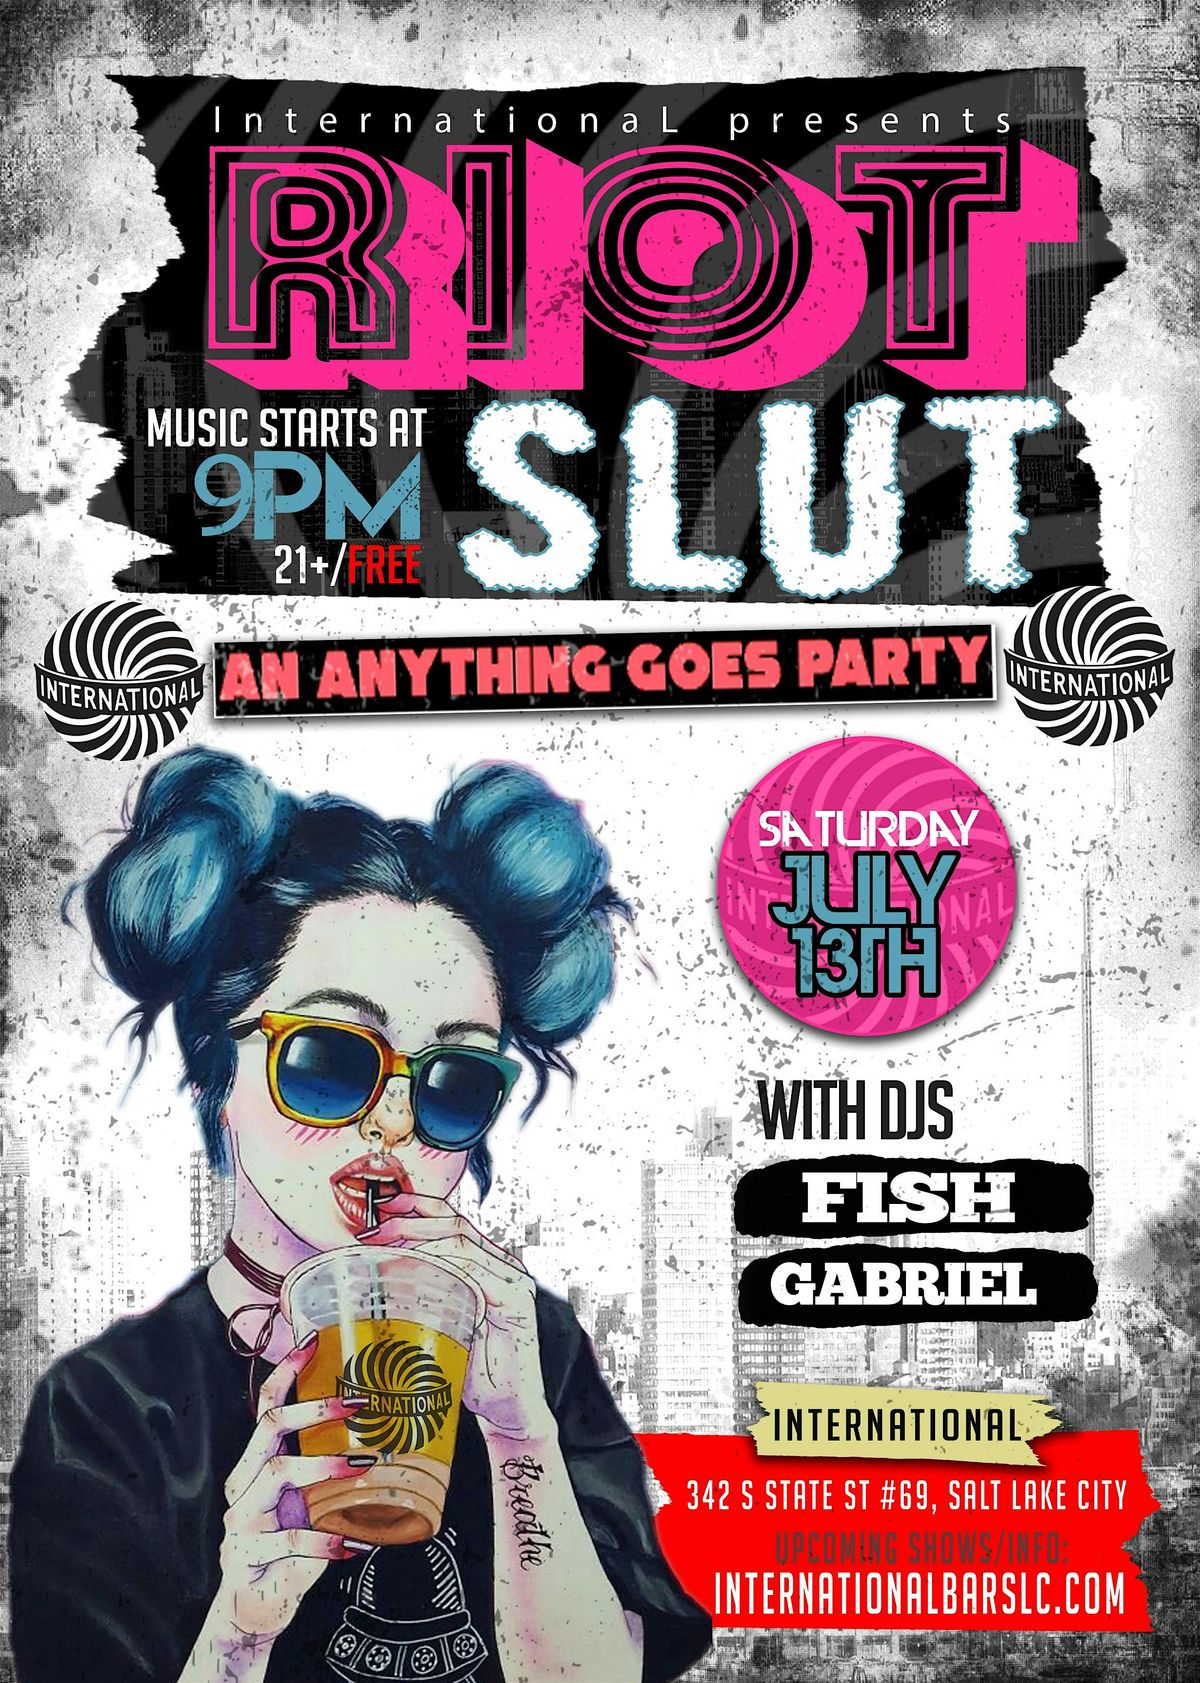 Riot Slut, and anything goes dance party at International